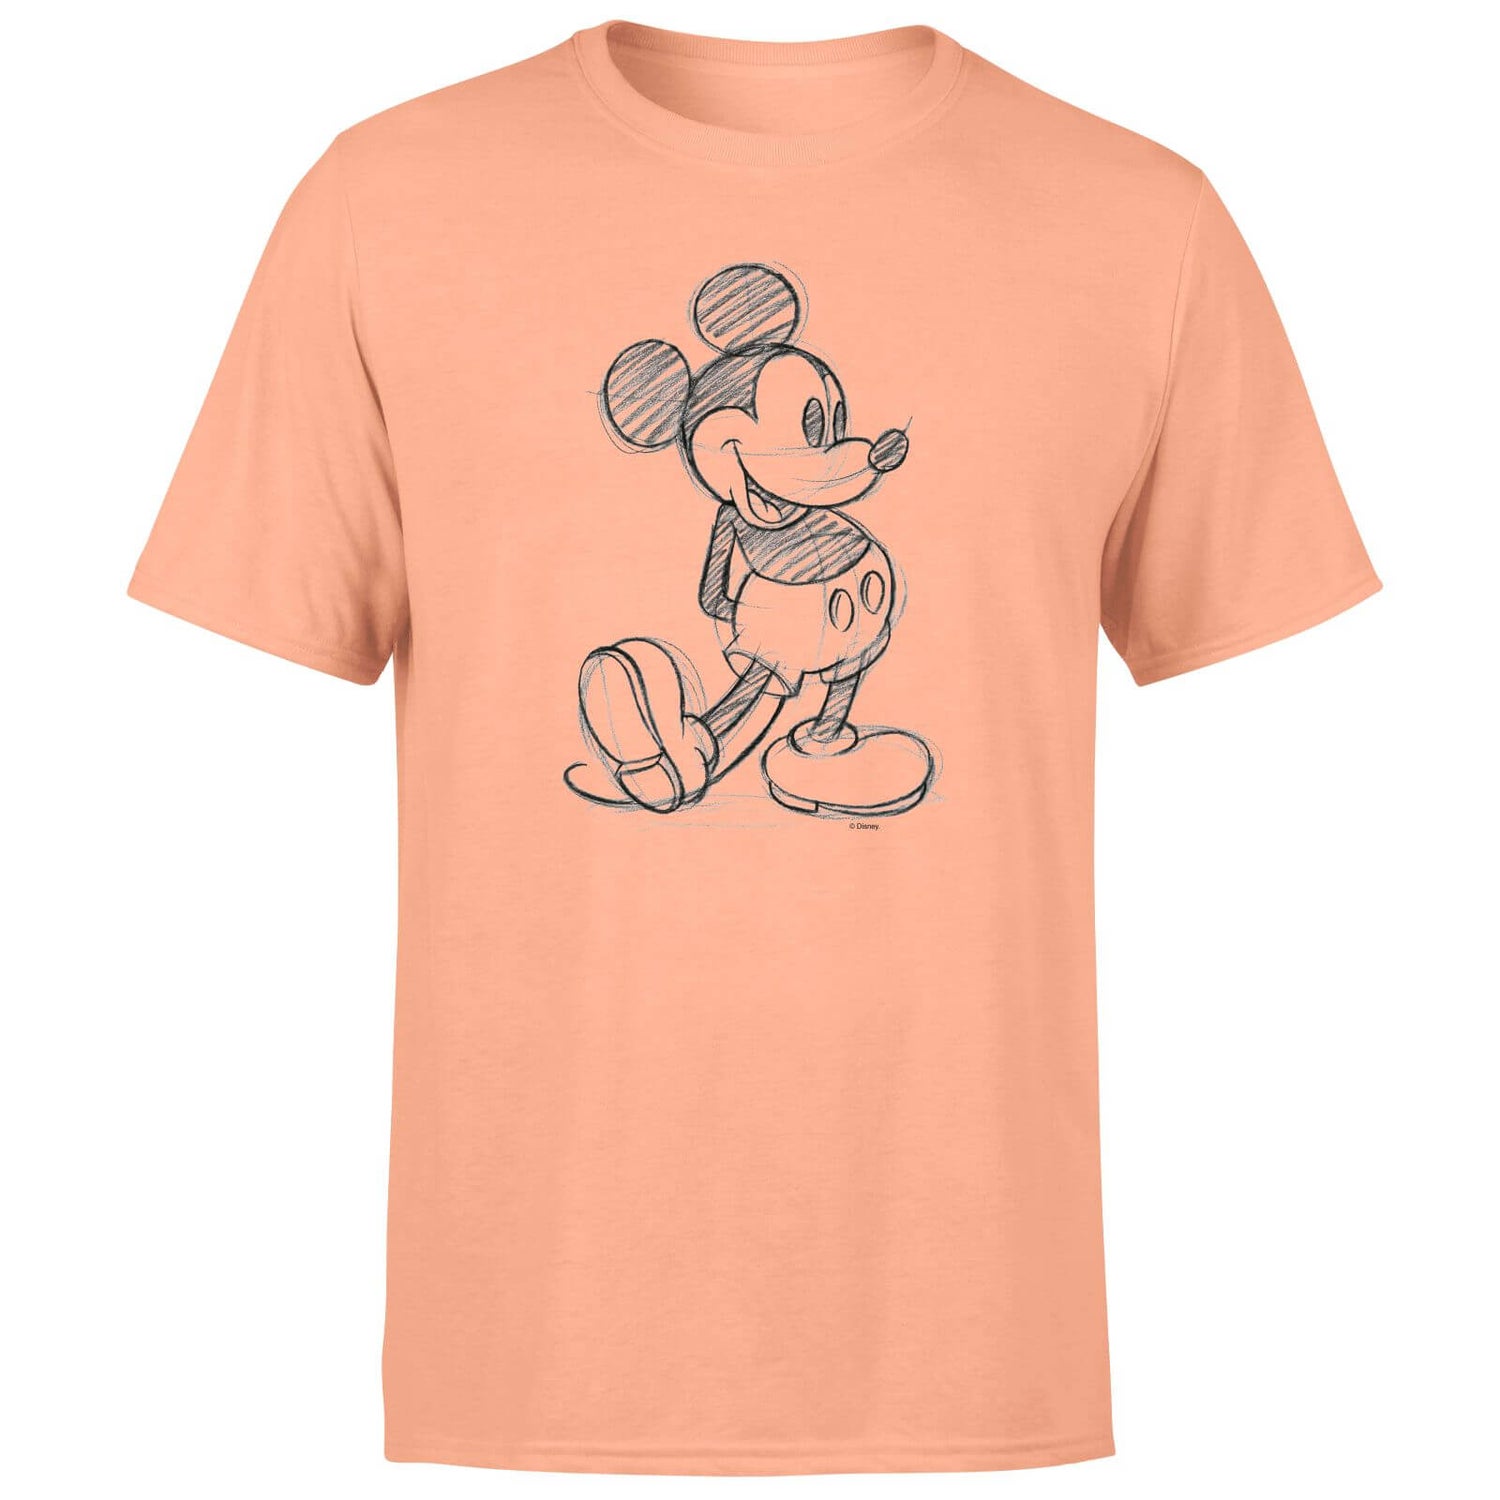 Disney Mickey Mouse Sketch Men's T-Shirt - Coral